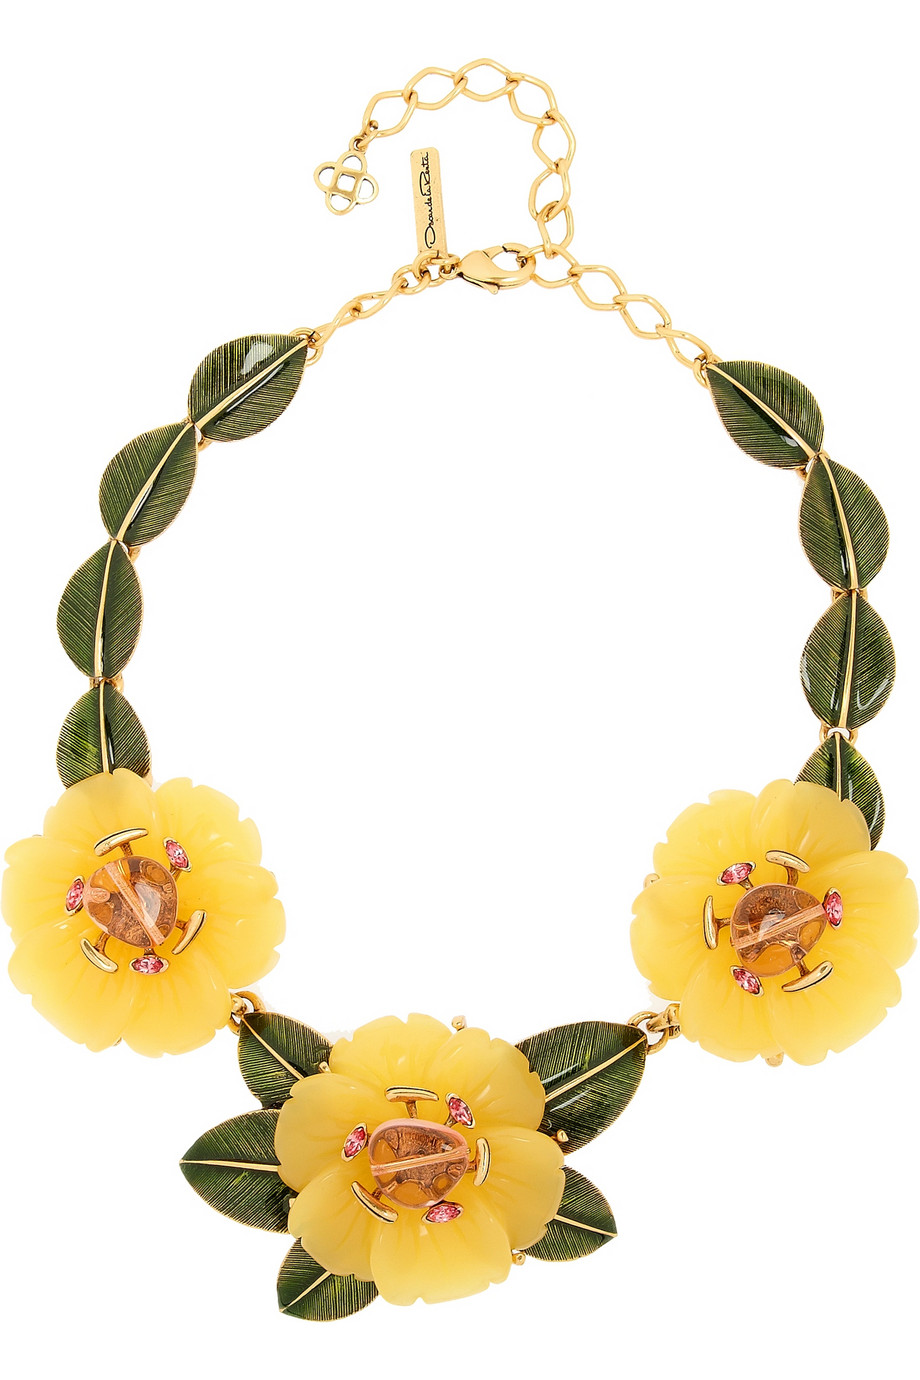 Stop And Smell The Peonies: Spring 2014 Accessories